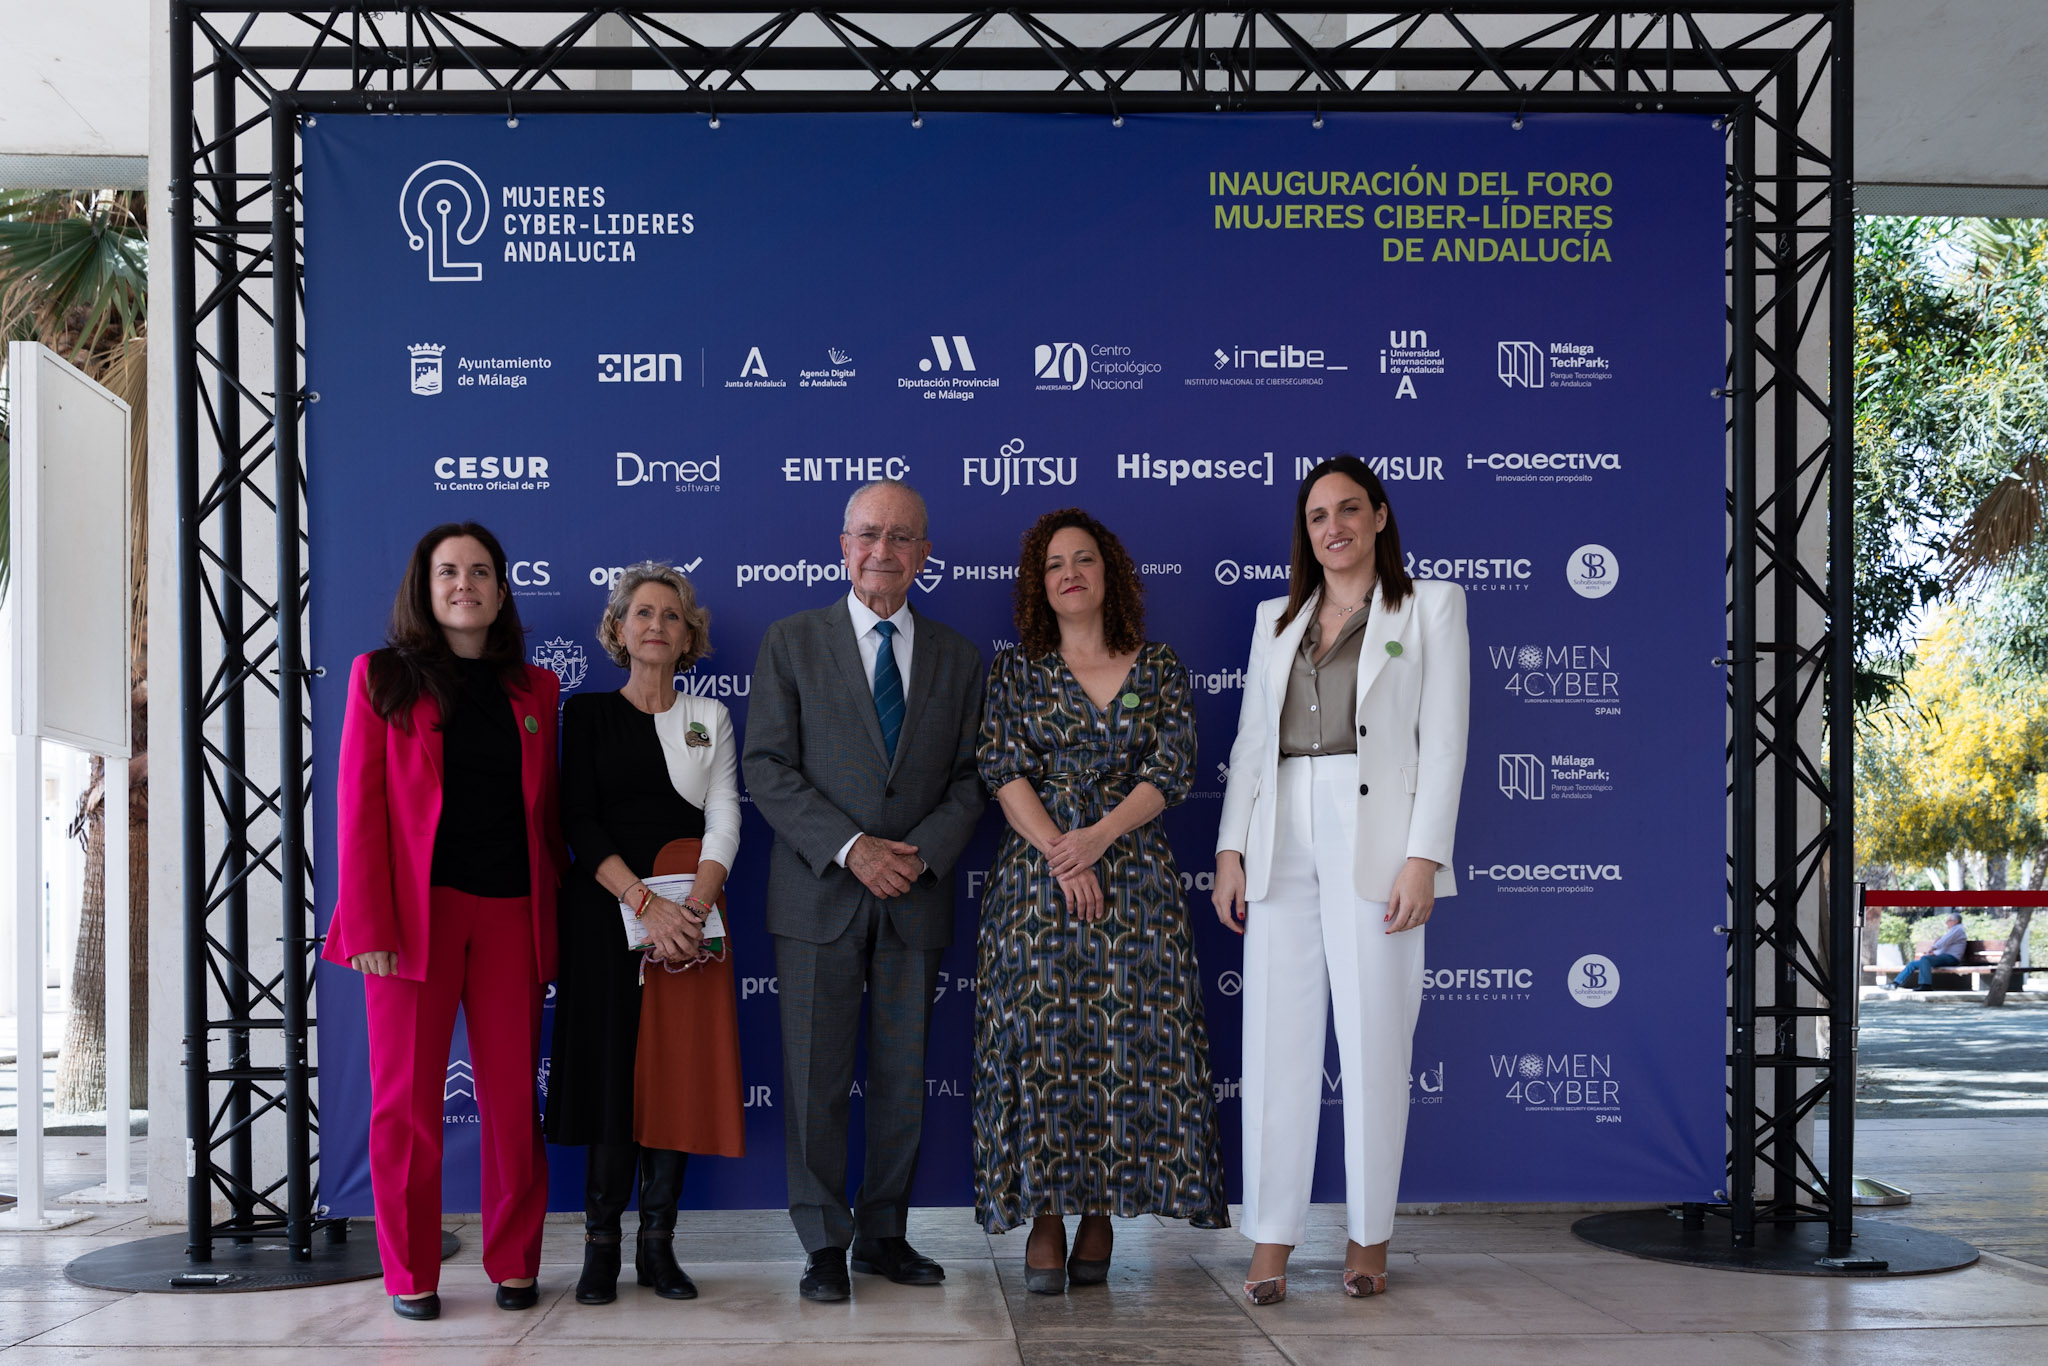 FORO MUJERES CYBER-LIDERES ANDALUCÍA